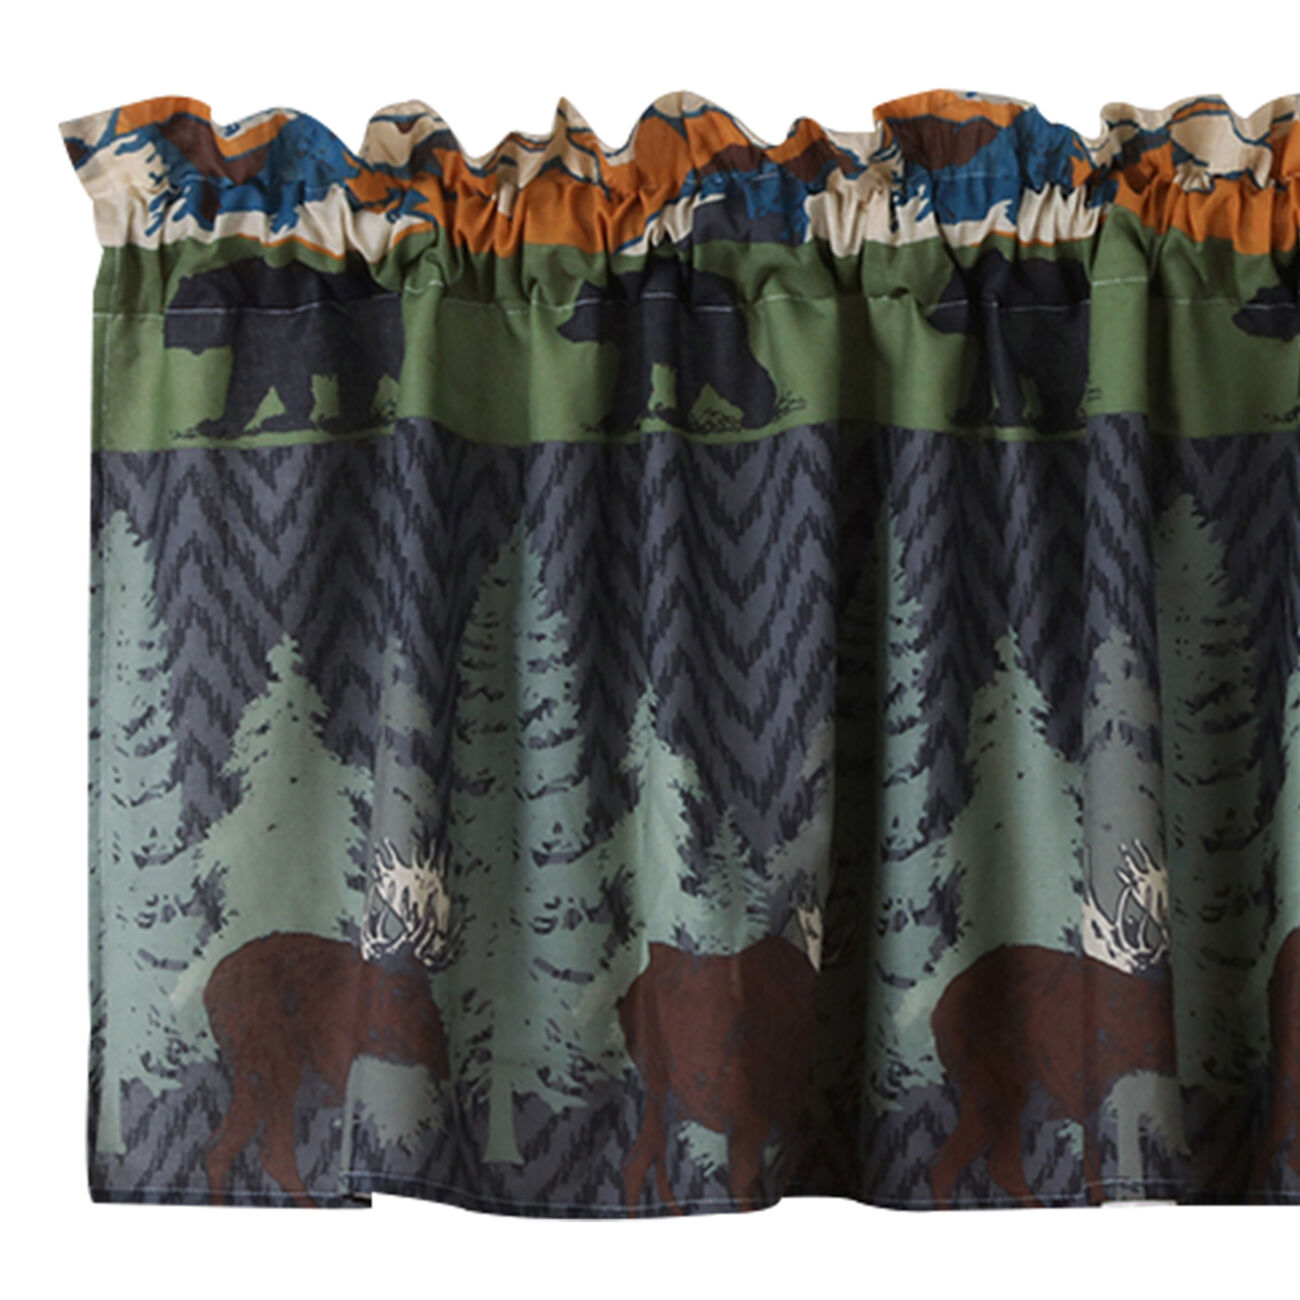 Polyester Valance with Nature Inspired Print, Multicolor